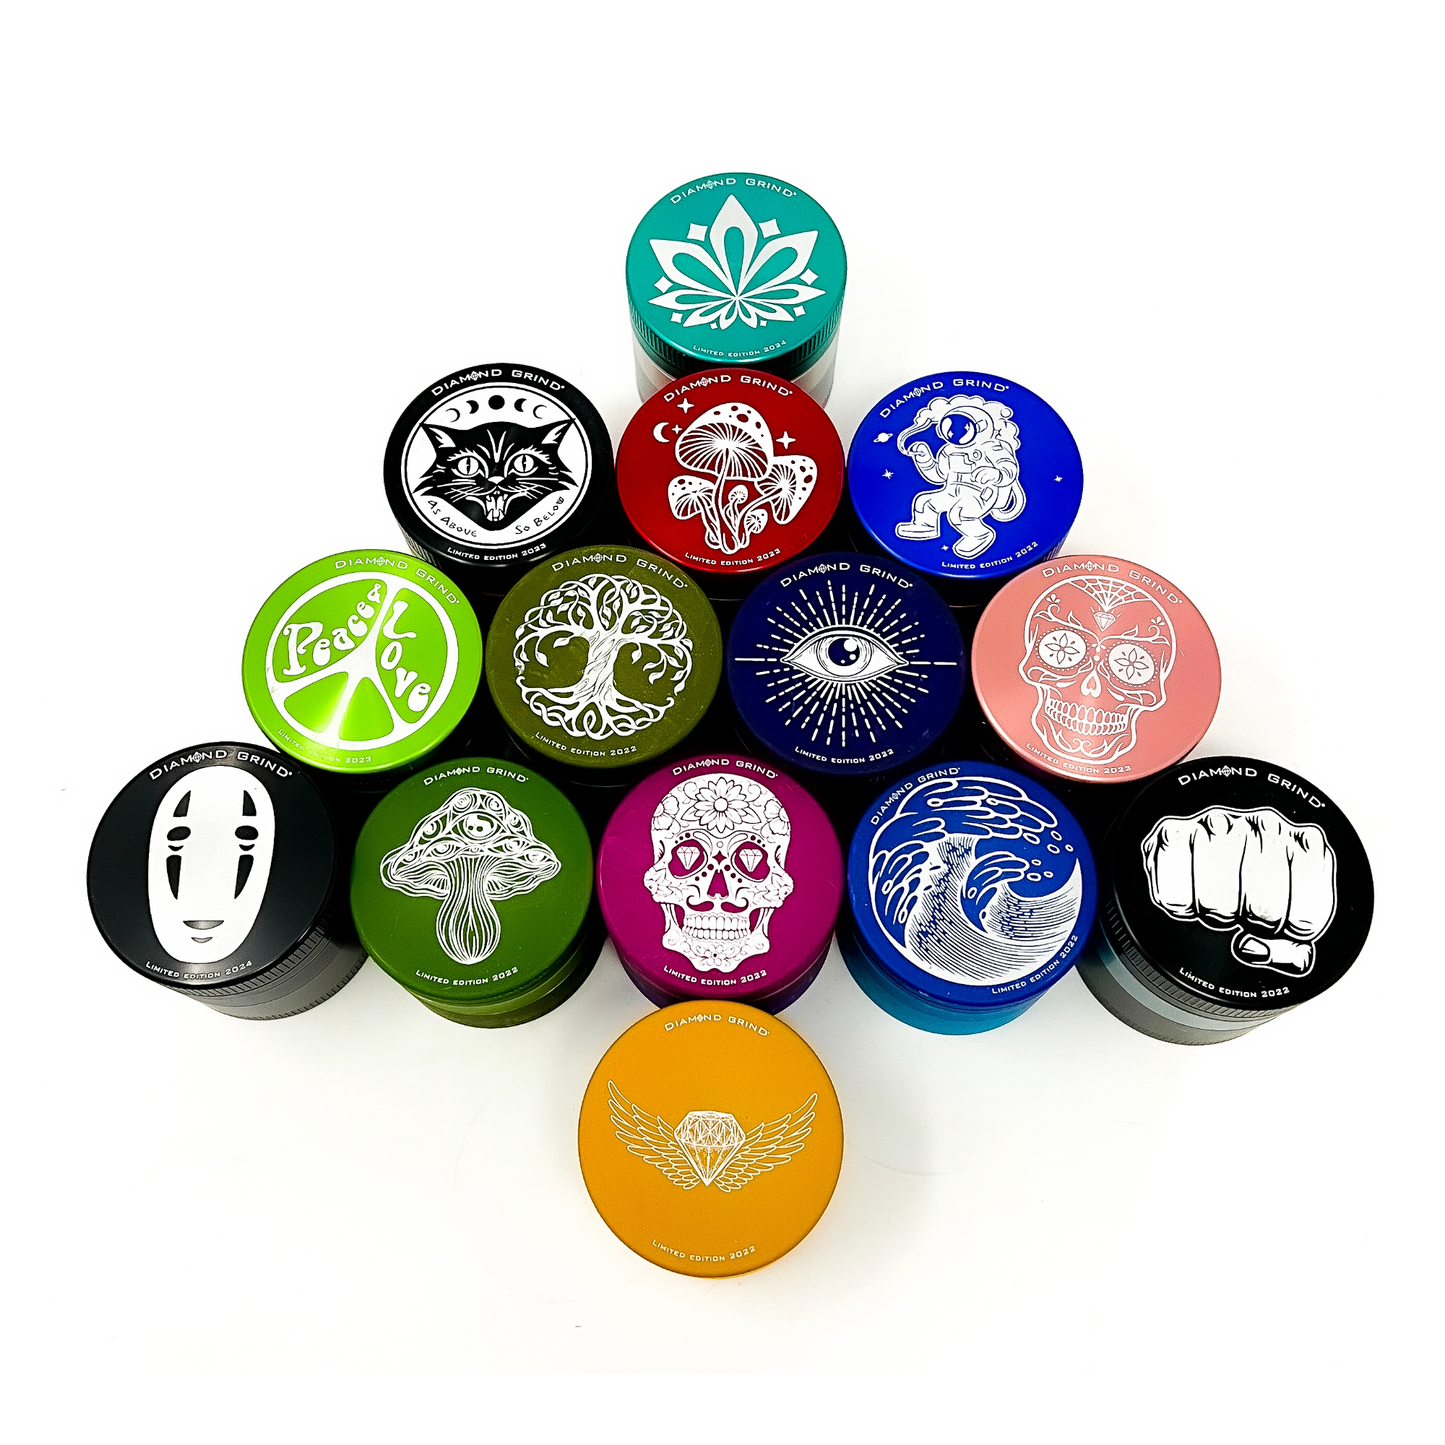 Diamond Grind Limited Edition Herb Grinder 56mm - 5th batch, numbered